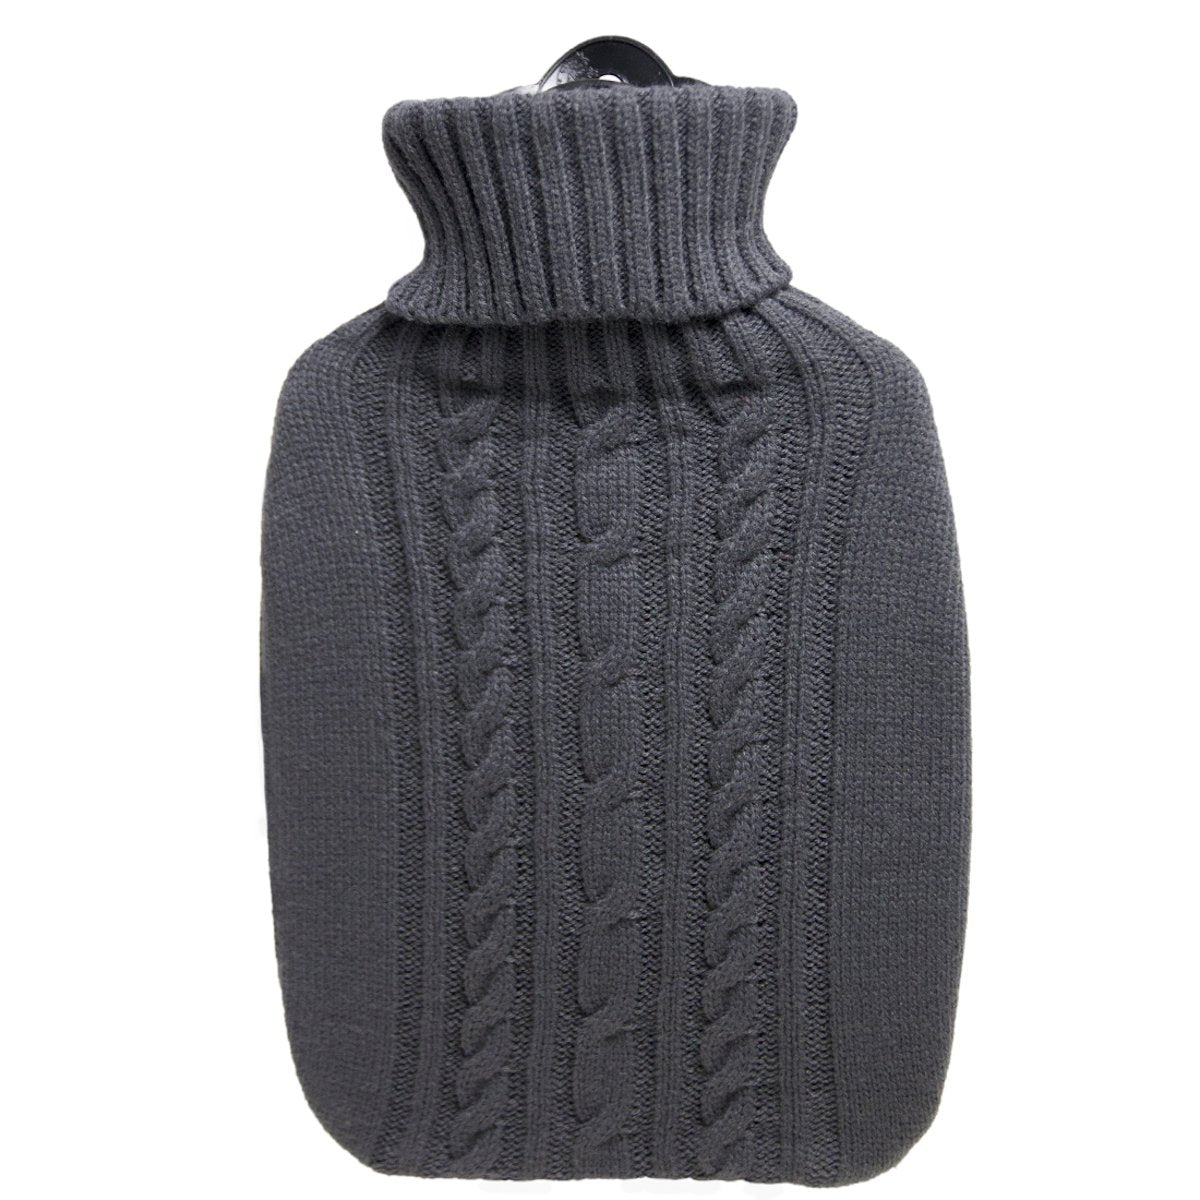 Hot Water Bottle Classic with Cover, Knitted - Dark Grey